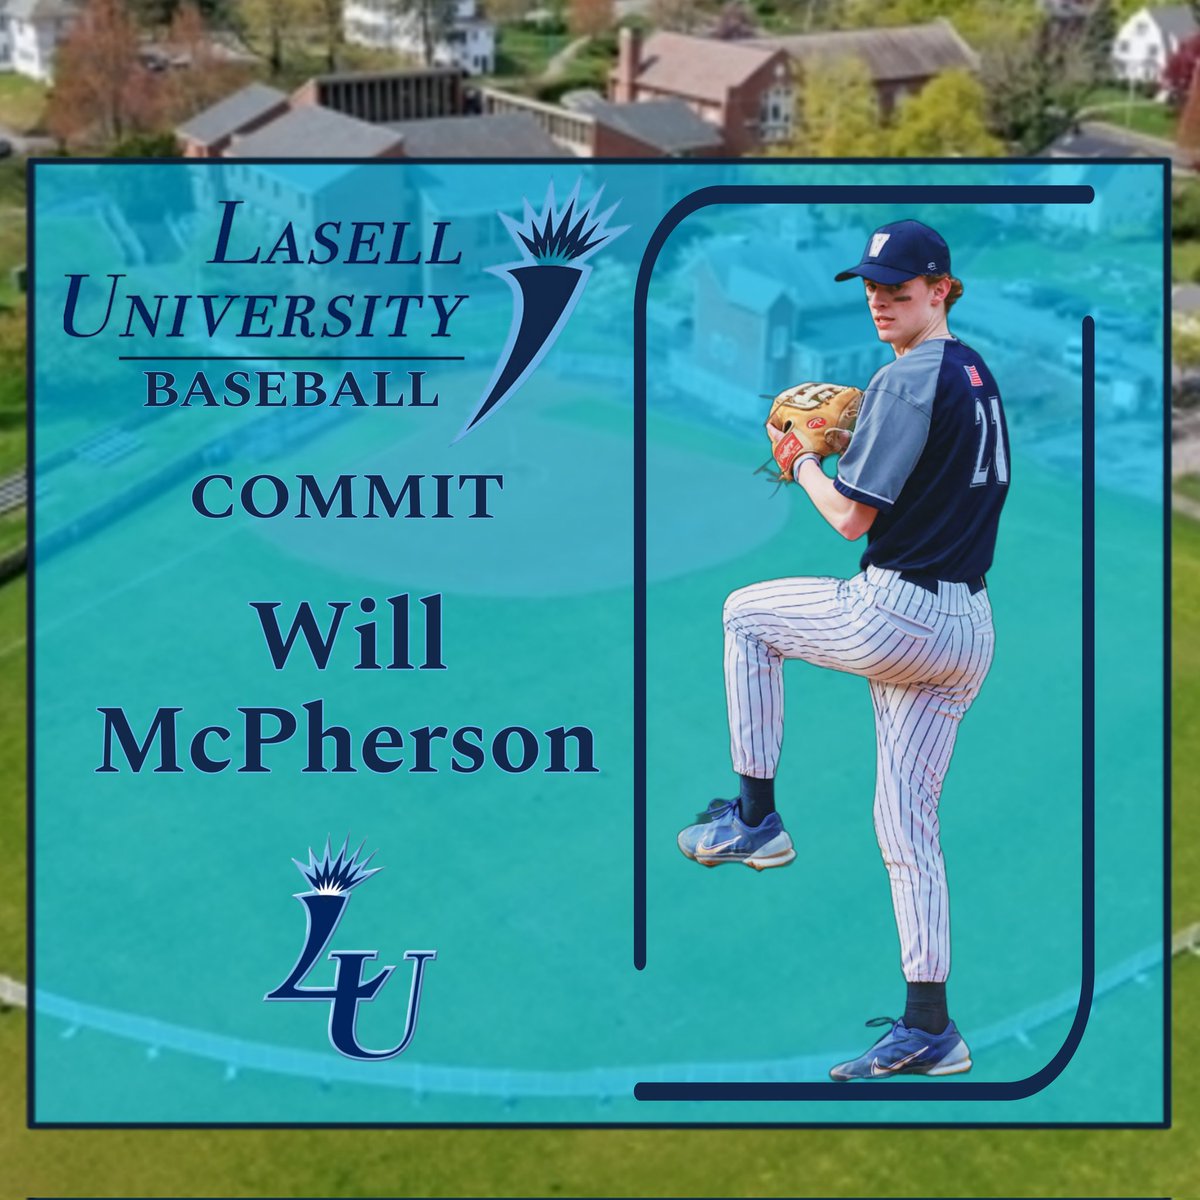 Congratulations to Valley's Will McPherson for committing to Lasell University next fall!